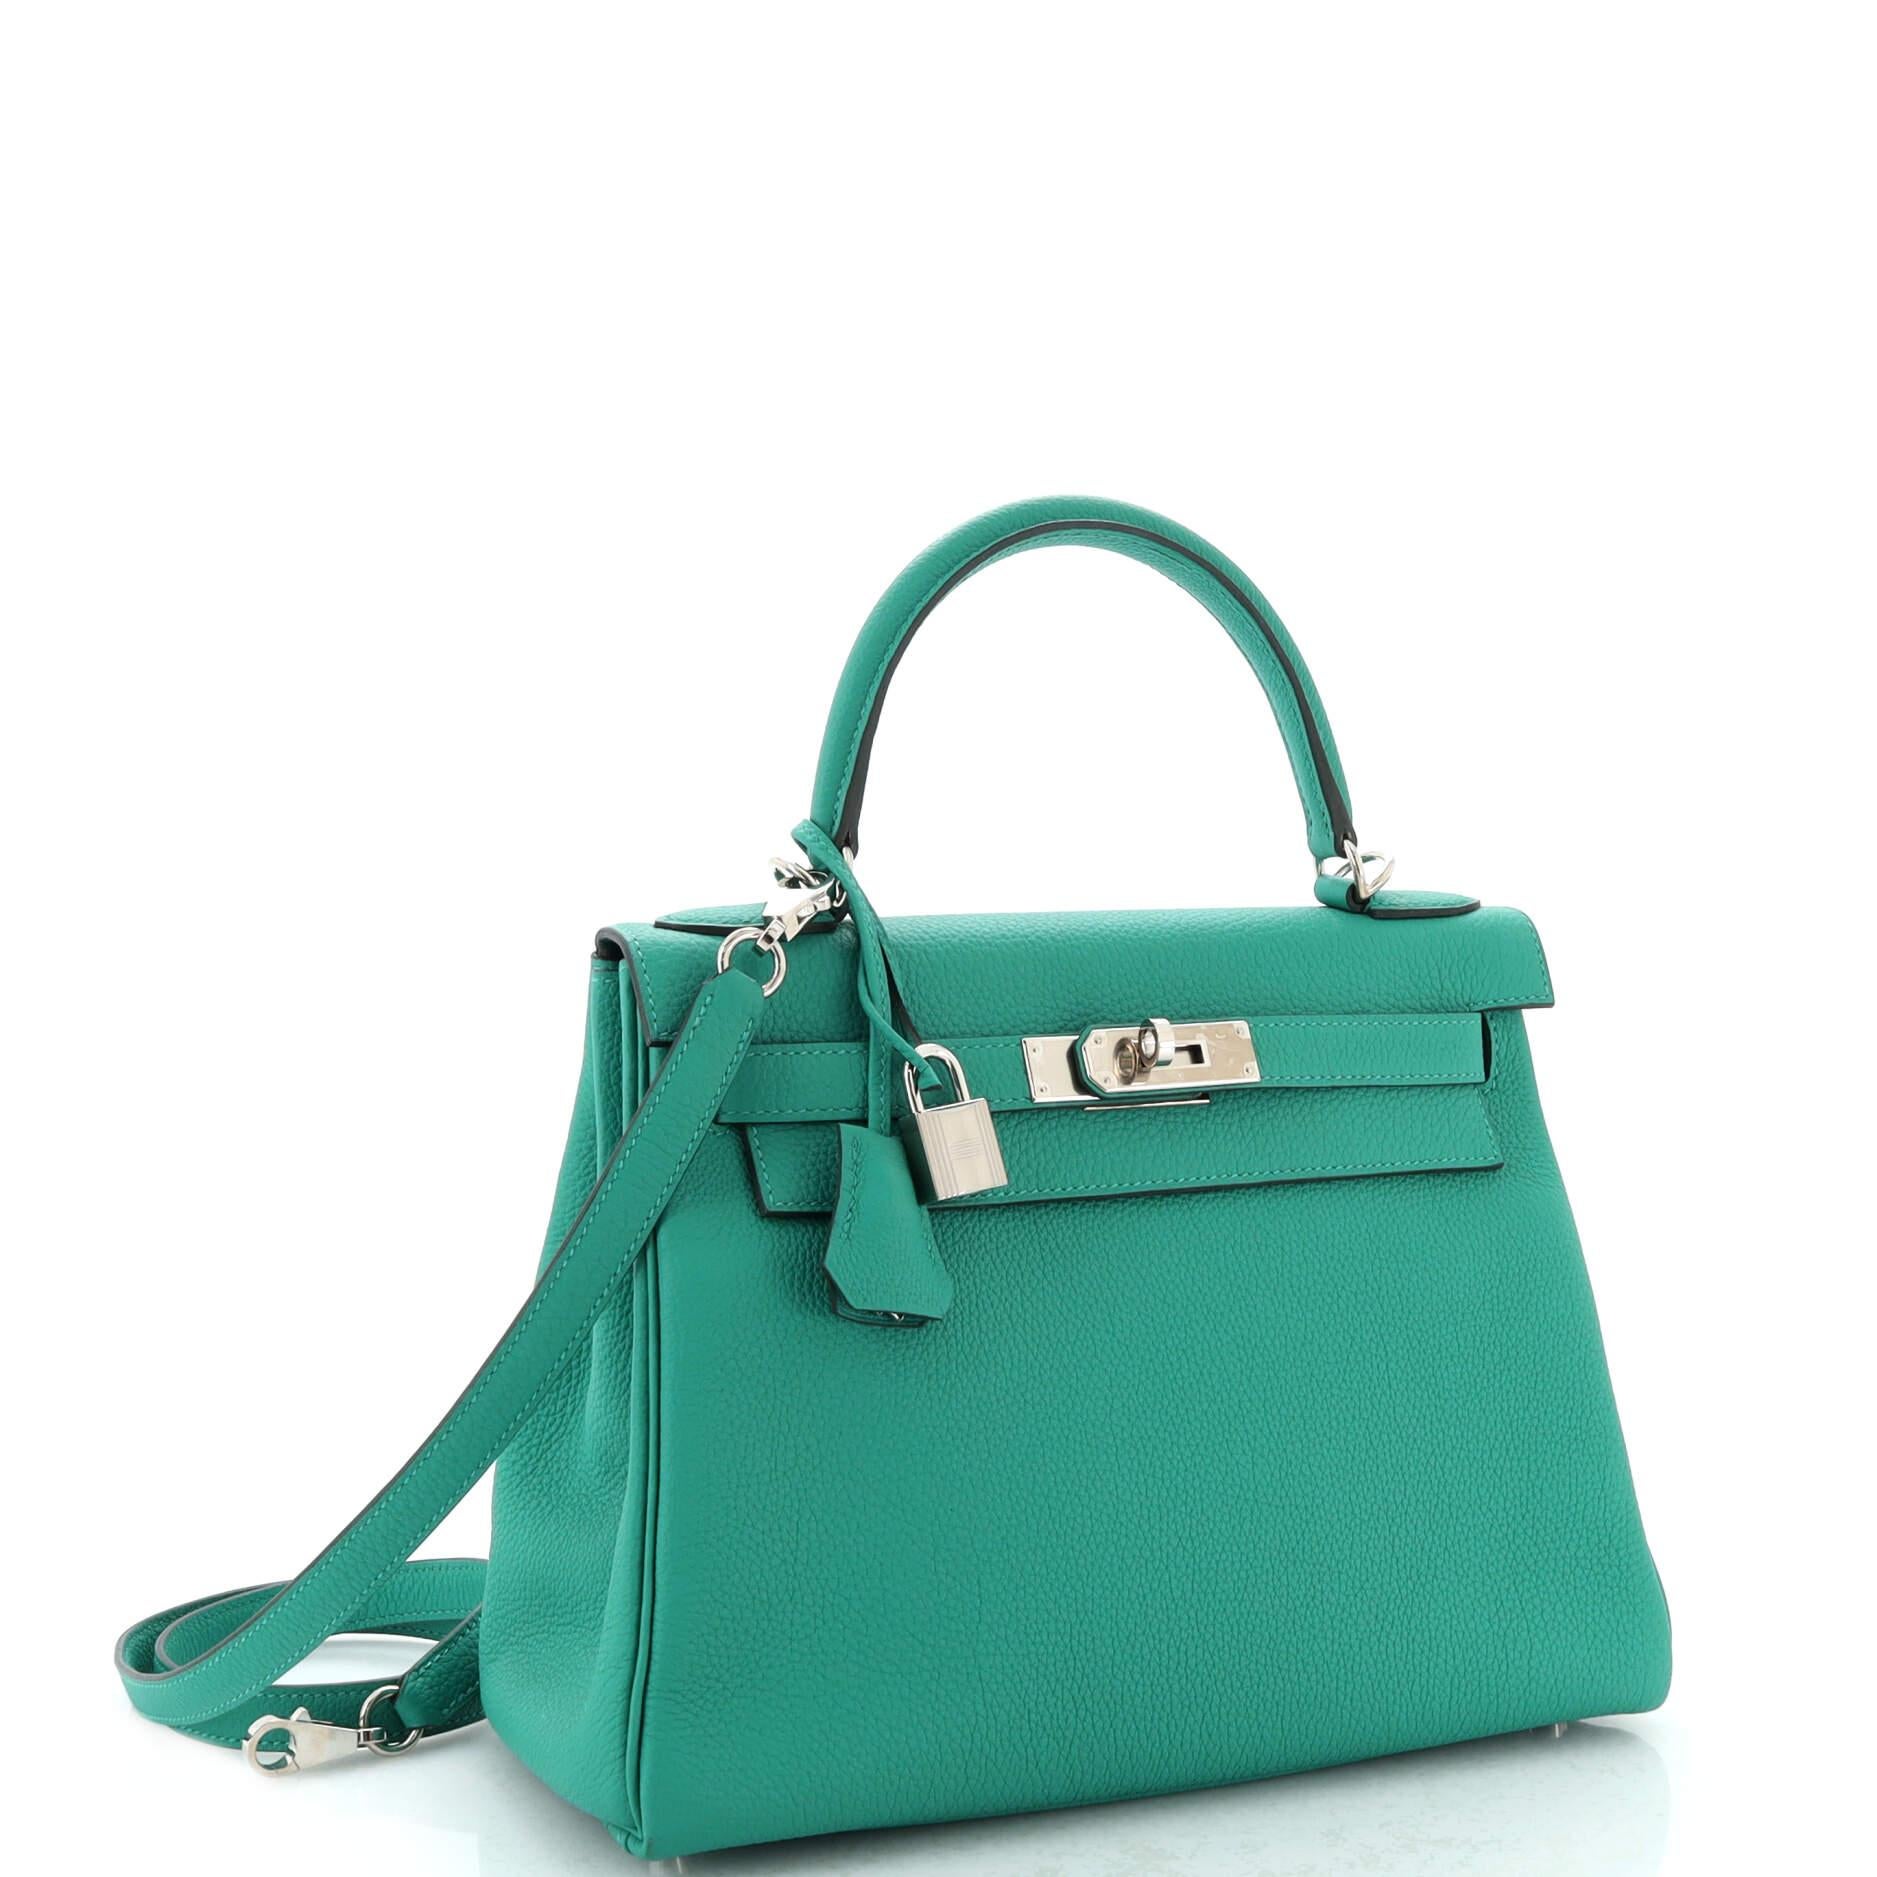 Hermes Kelly Handbag Vert Verone Togo with Palladium Hardware In Good Condition For Sale In NY, NY